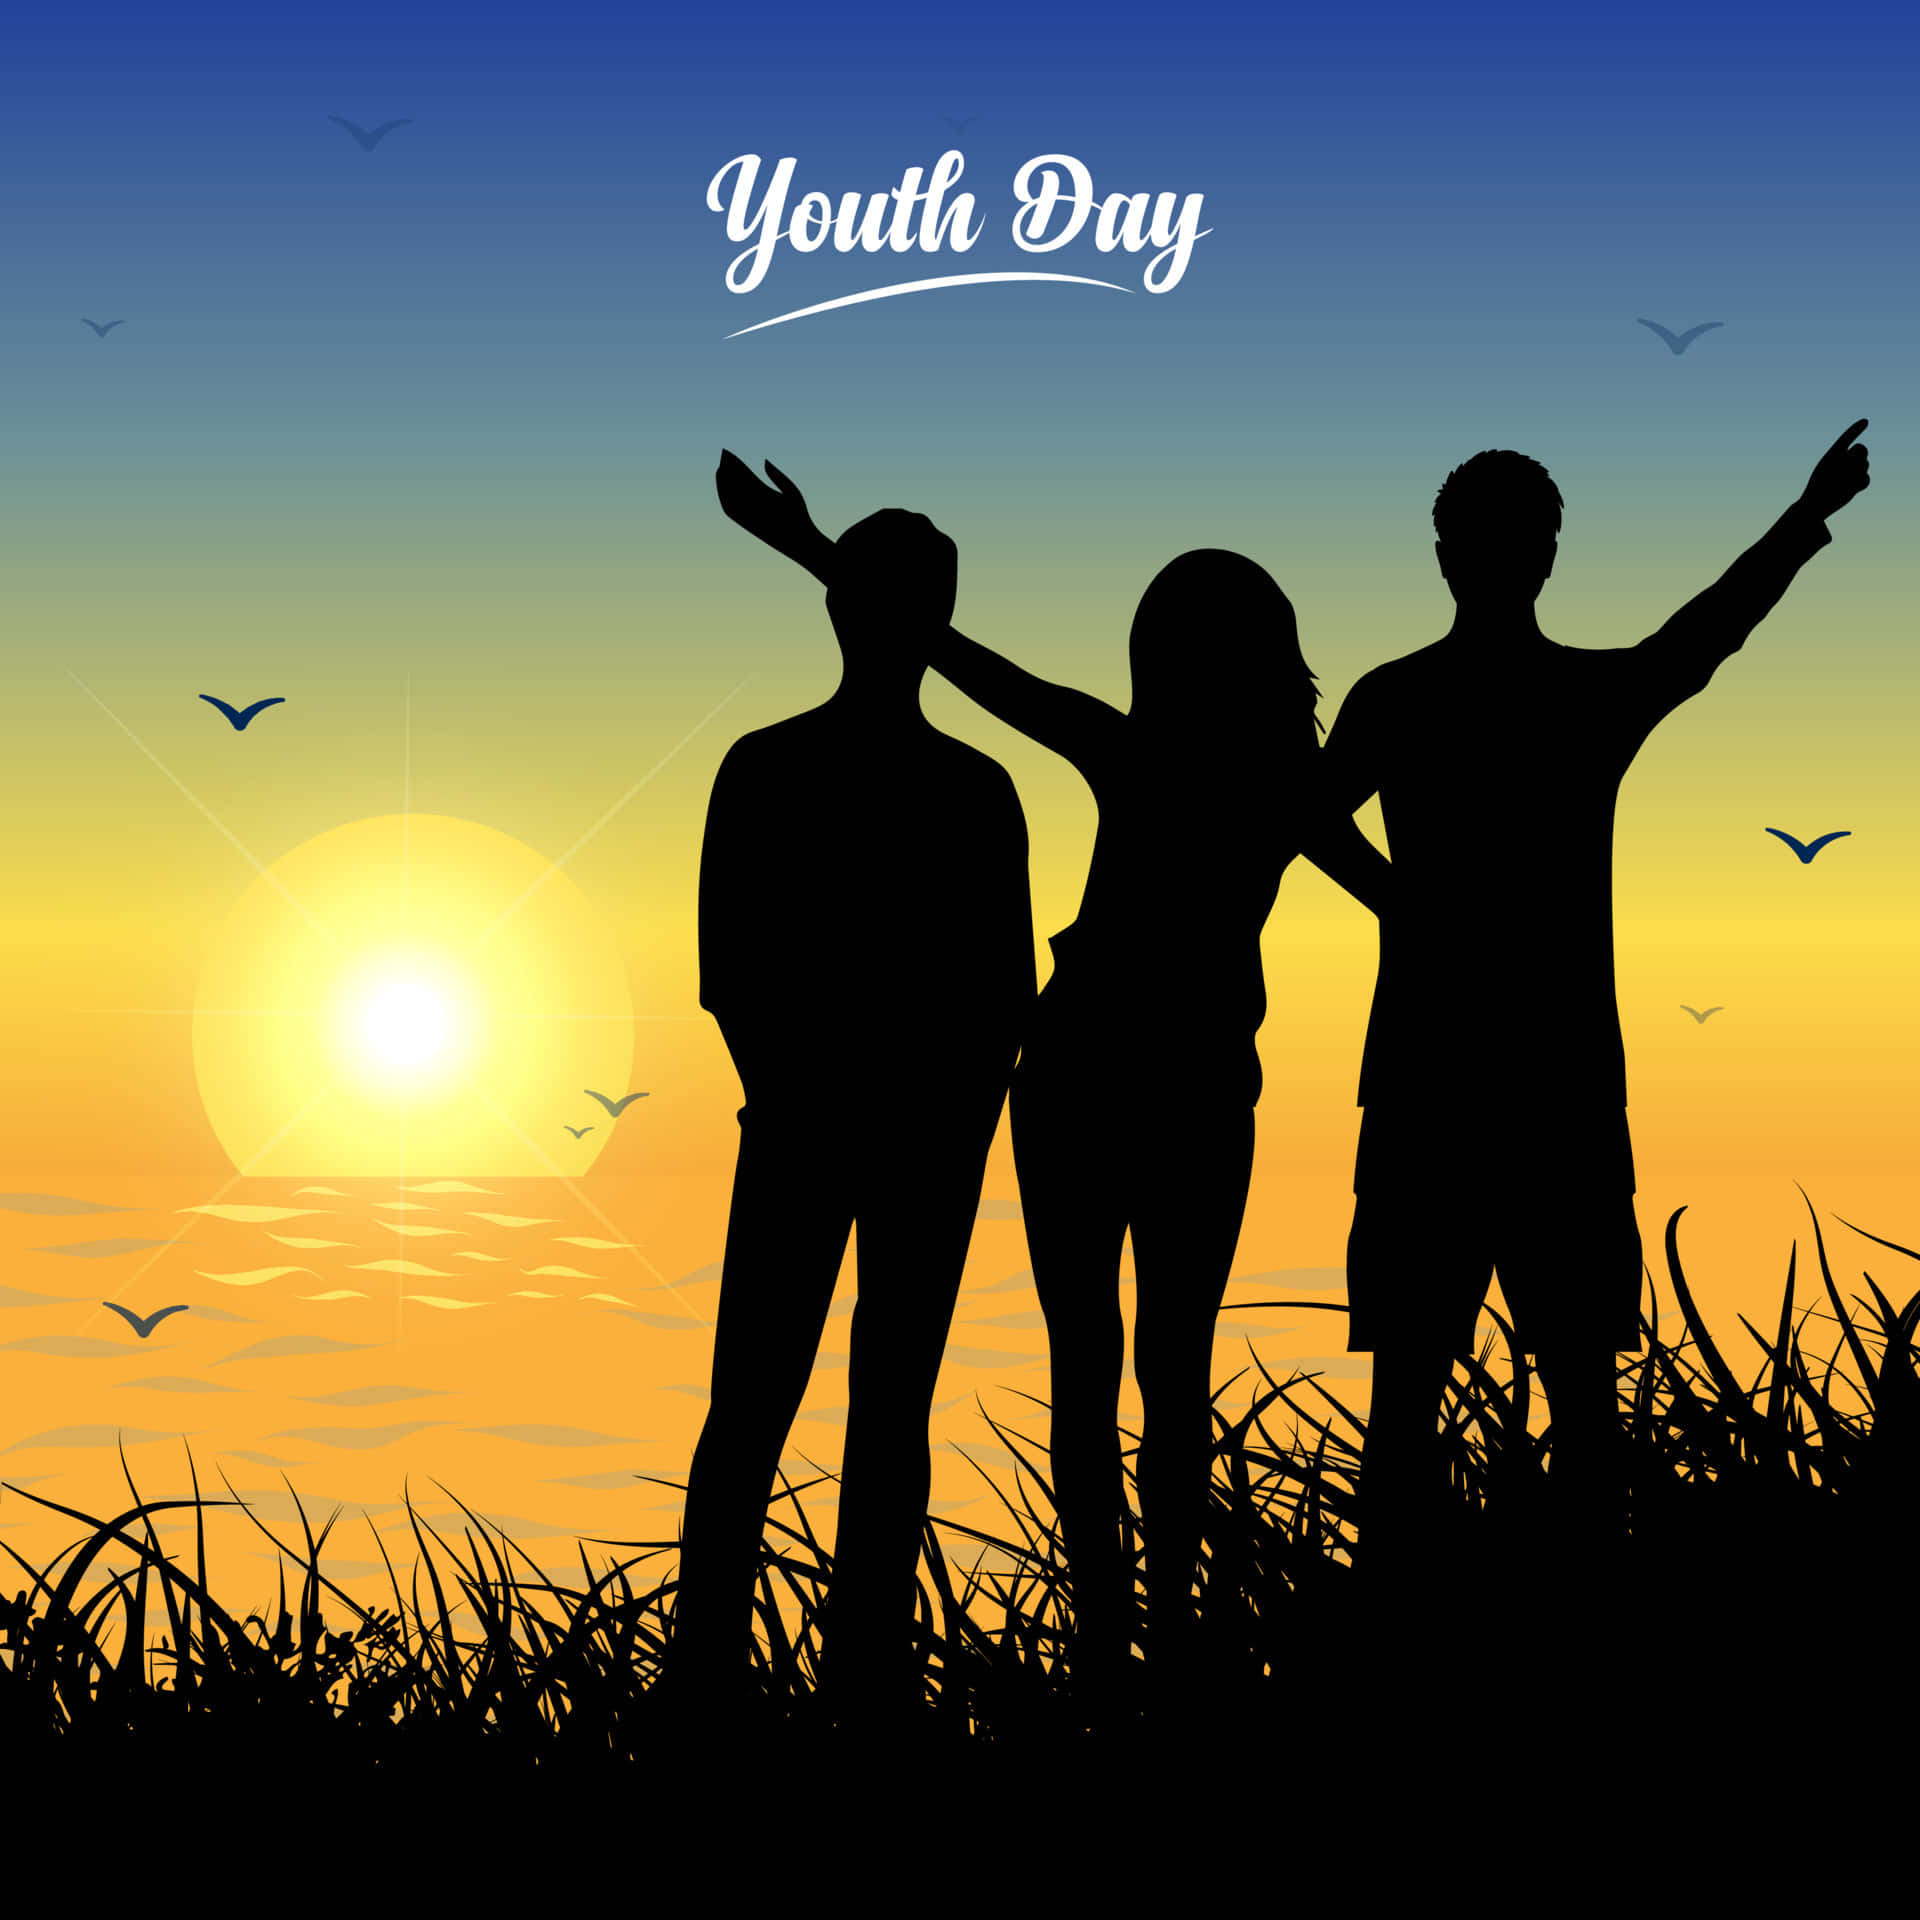 Cute Aesthetic Teenage Youth Day Wallpaper